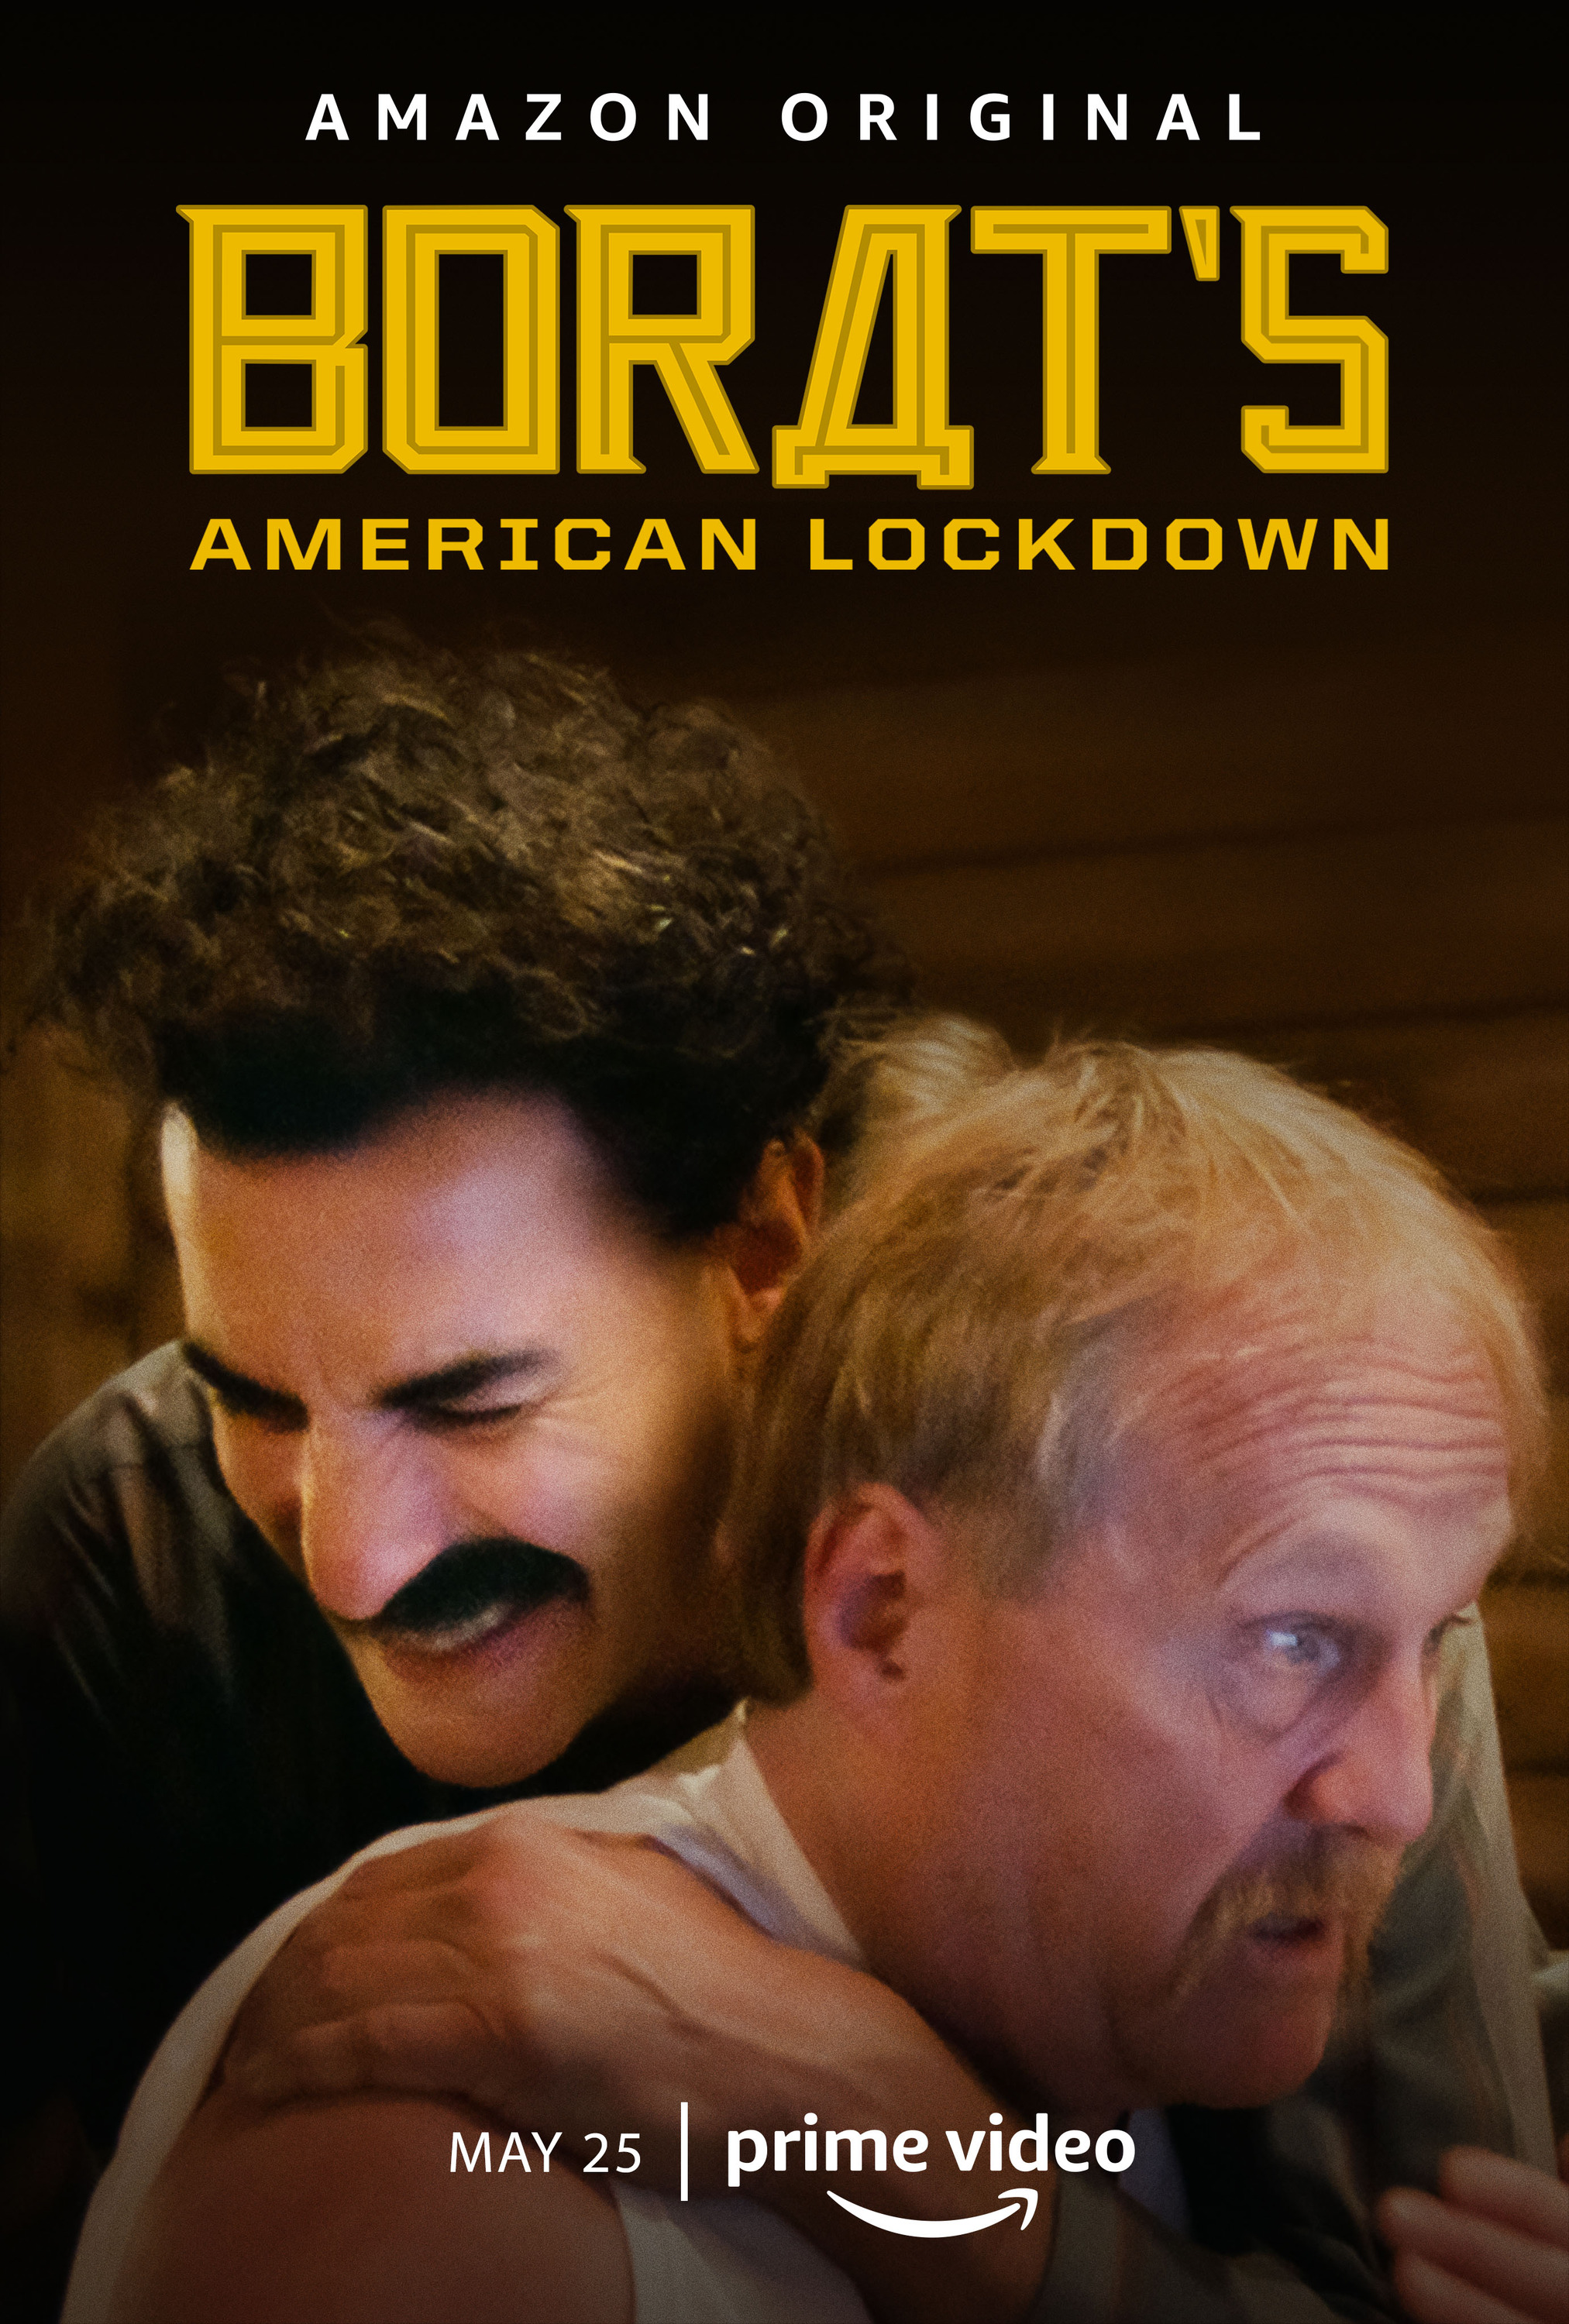 Mega Sized TV Poster Image for Borat Supplemental Reportings Retrieved from Floor of Stable Containing Editing (#2 of 3)